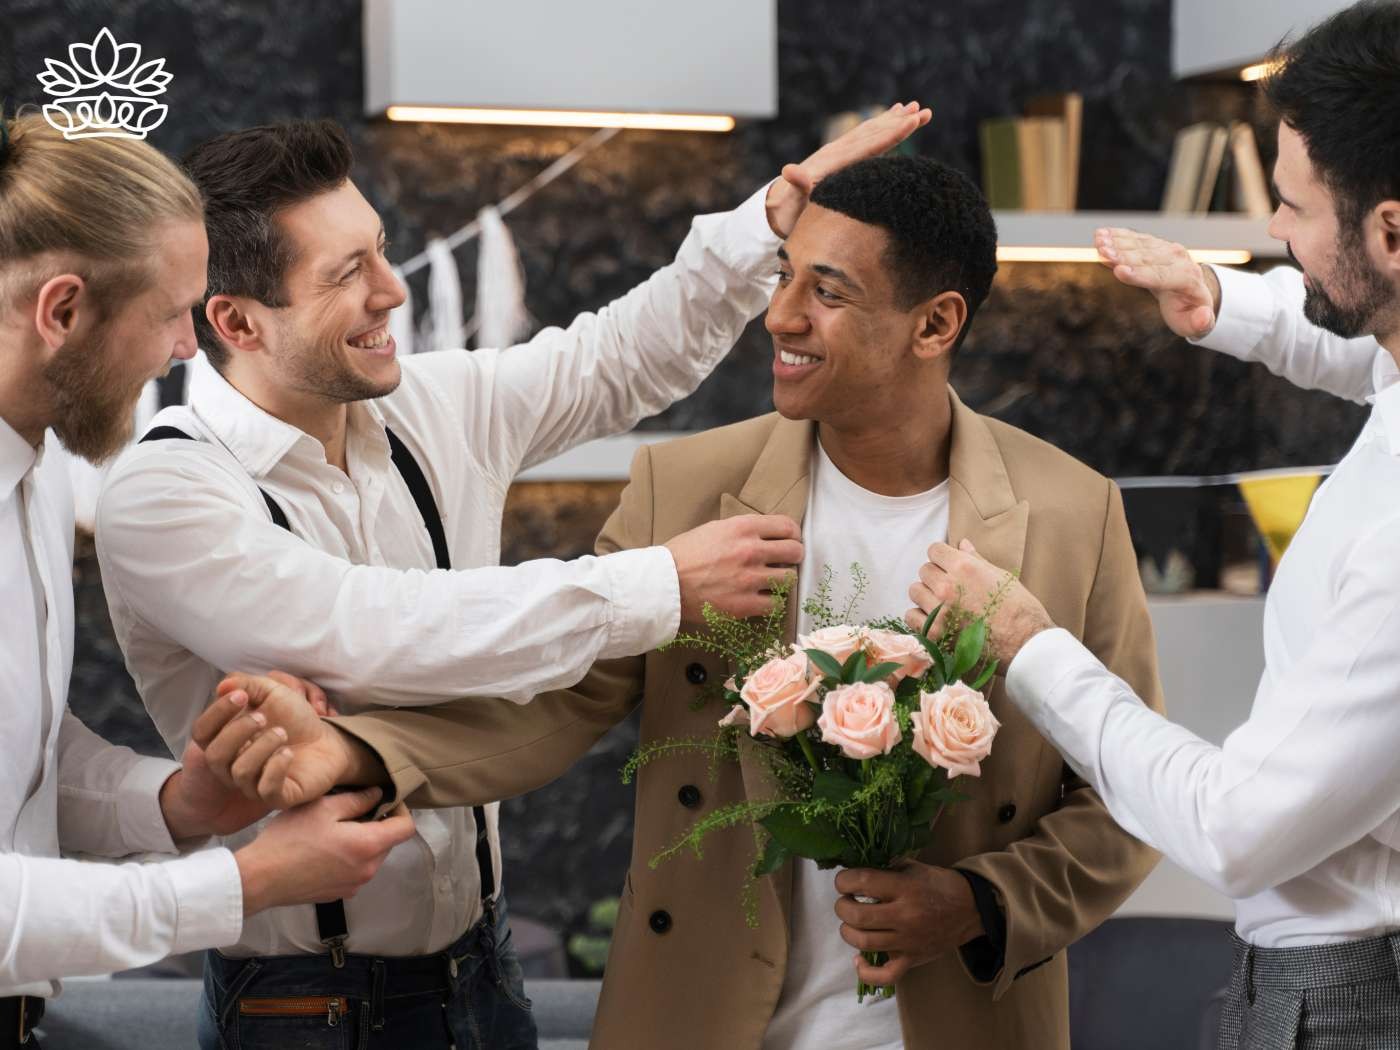 A group of colleagues celebrating a moment of farewell with one employee holding a bouquet from the Farewell Flowers and Gifts Collection. Their joyful expressions convey appreciation, making it a great gift from Fabulous Flowers and Gifts, symbolizing better coworker relationships and the spirit of gifting.